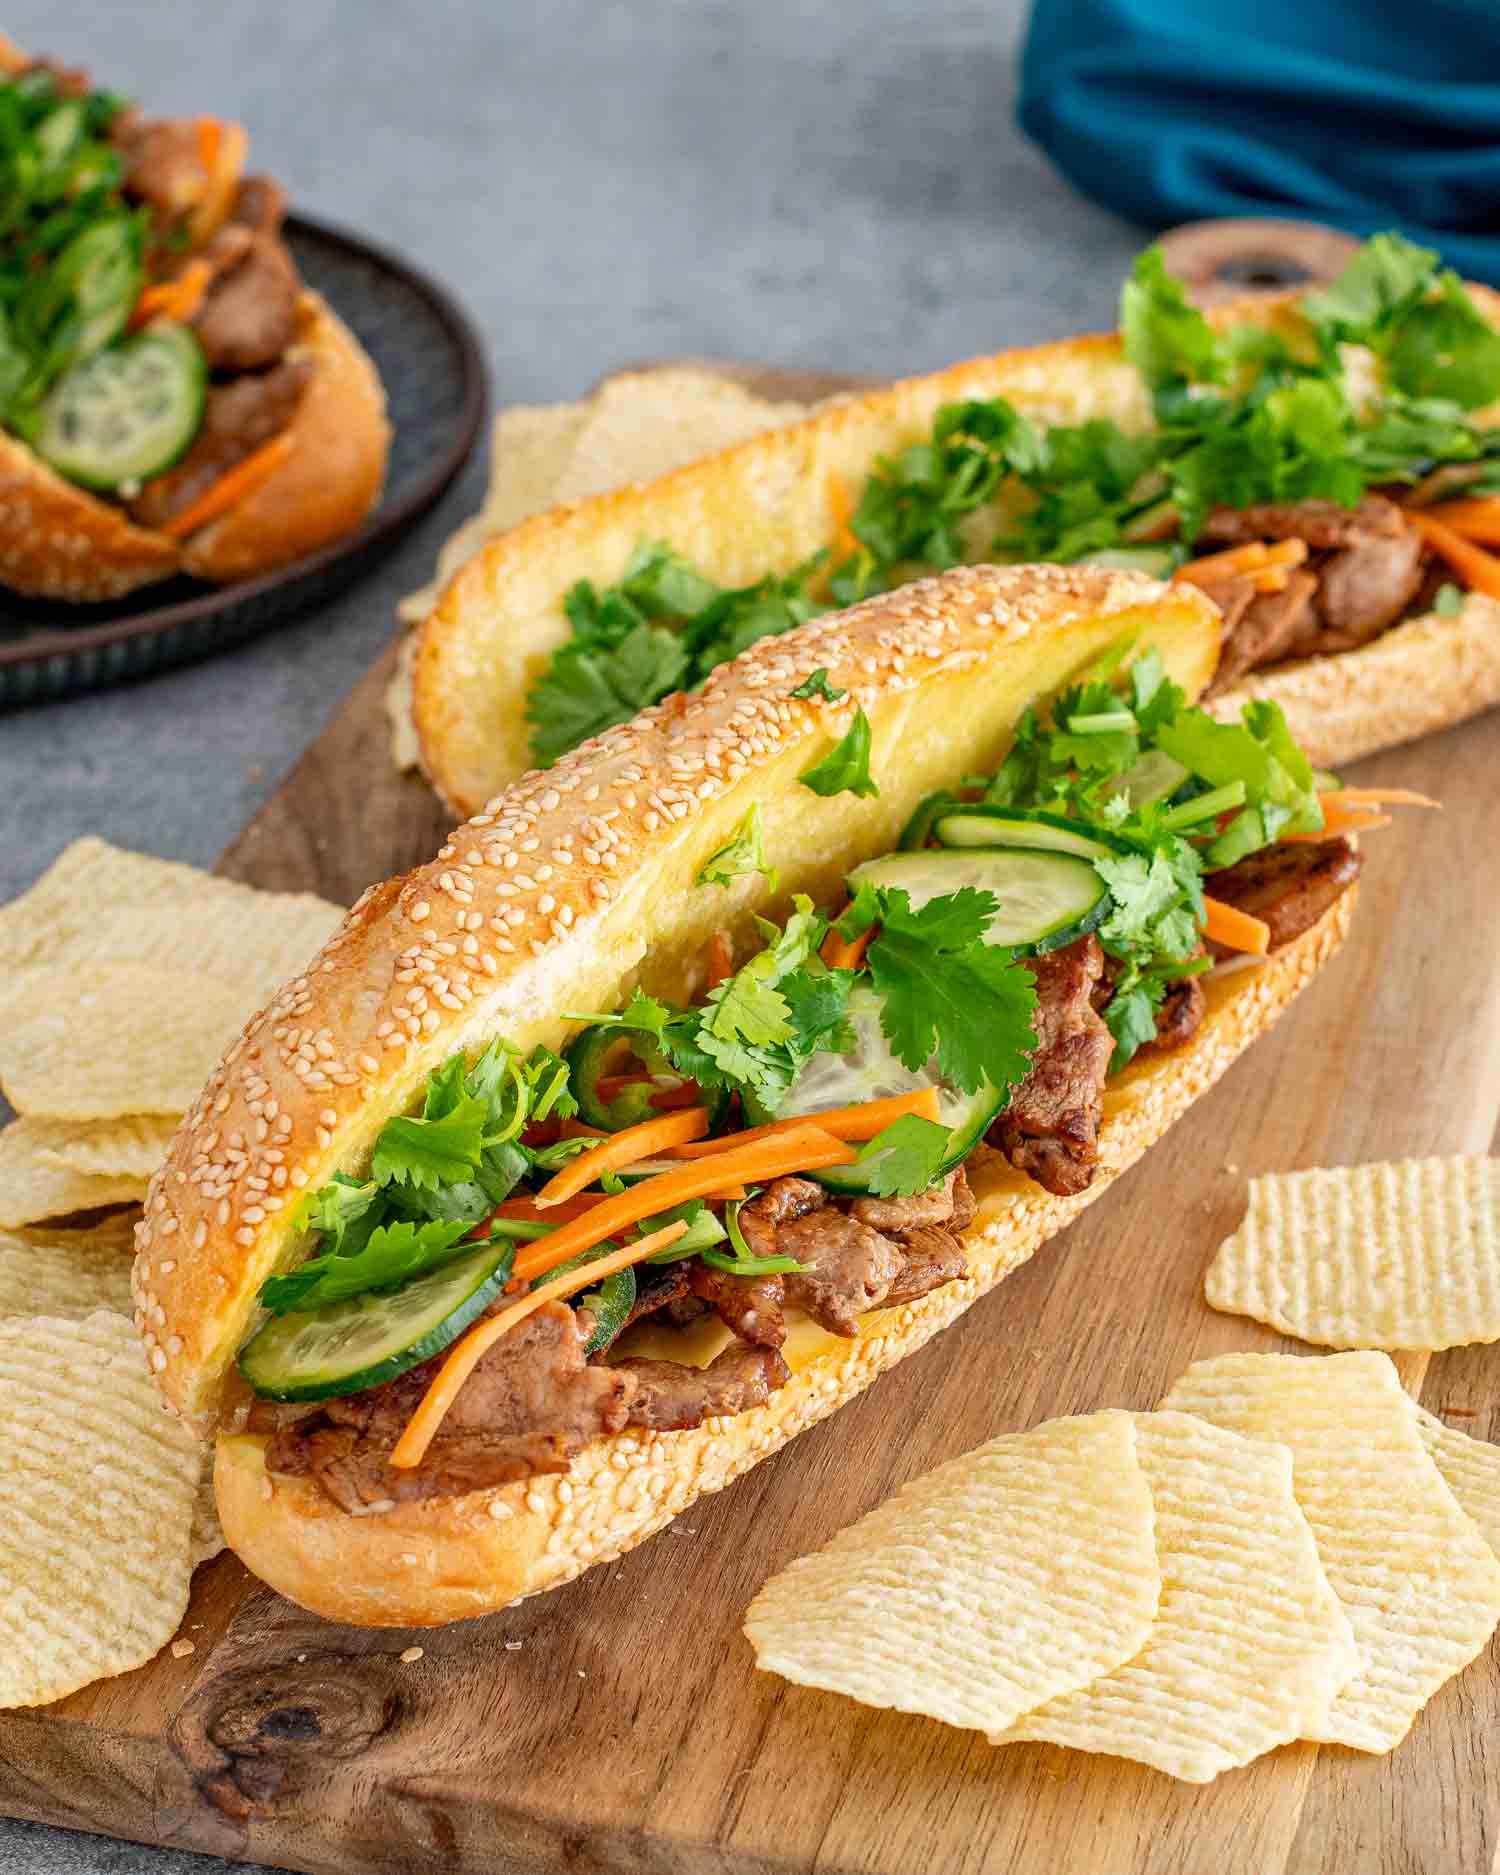 banh mi sandwiches on a cutting board with some chips around it.